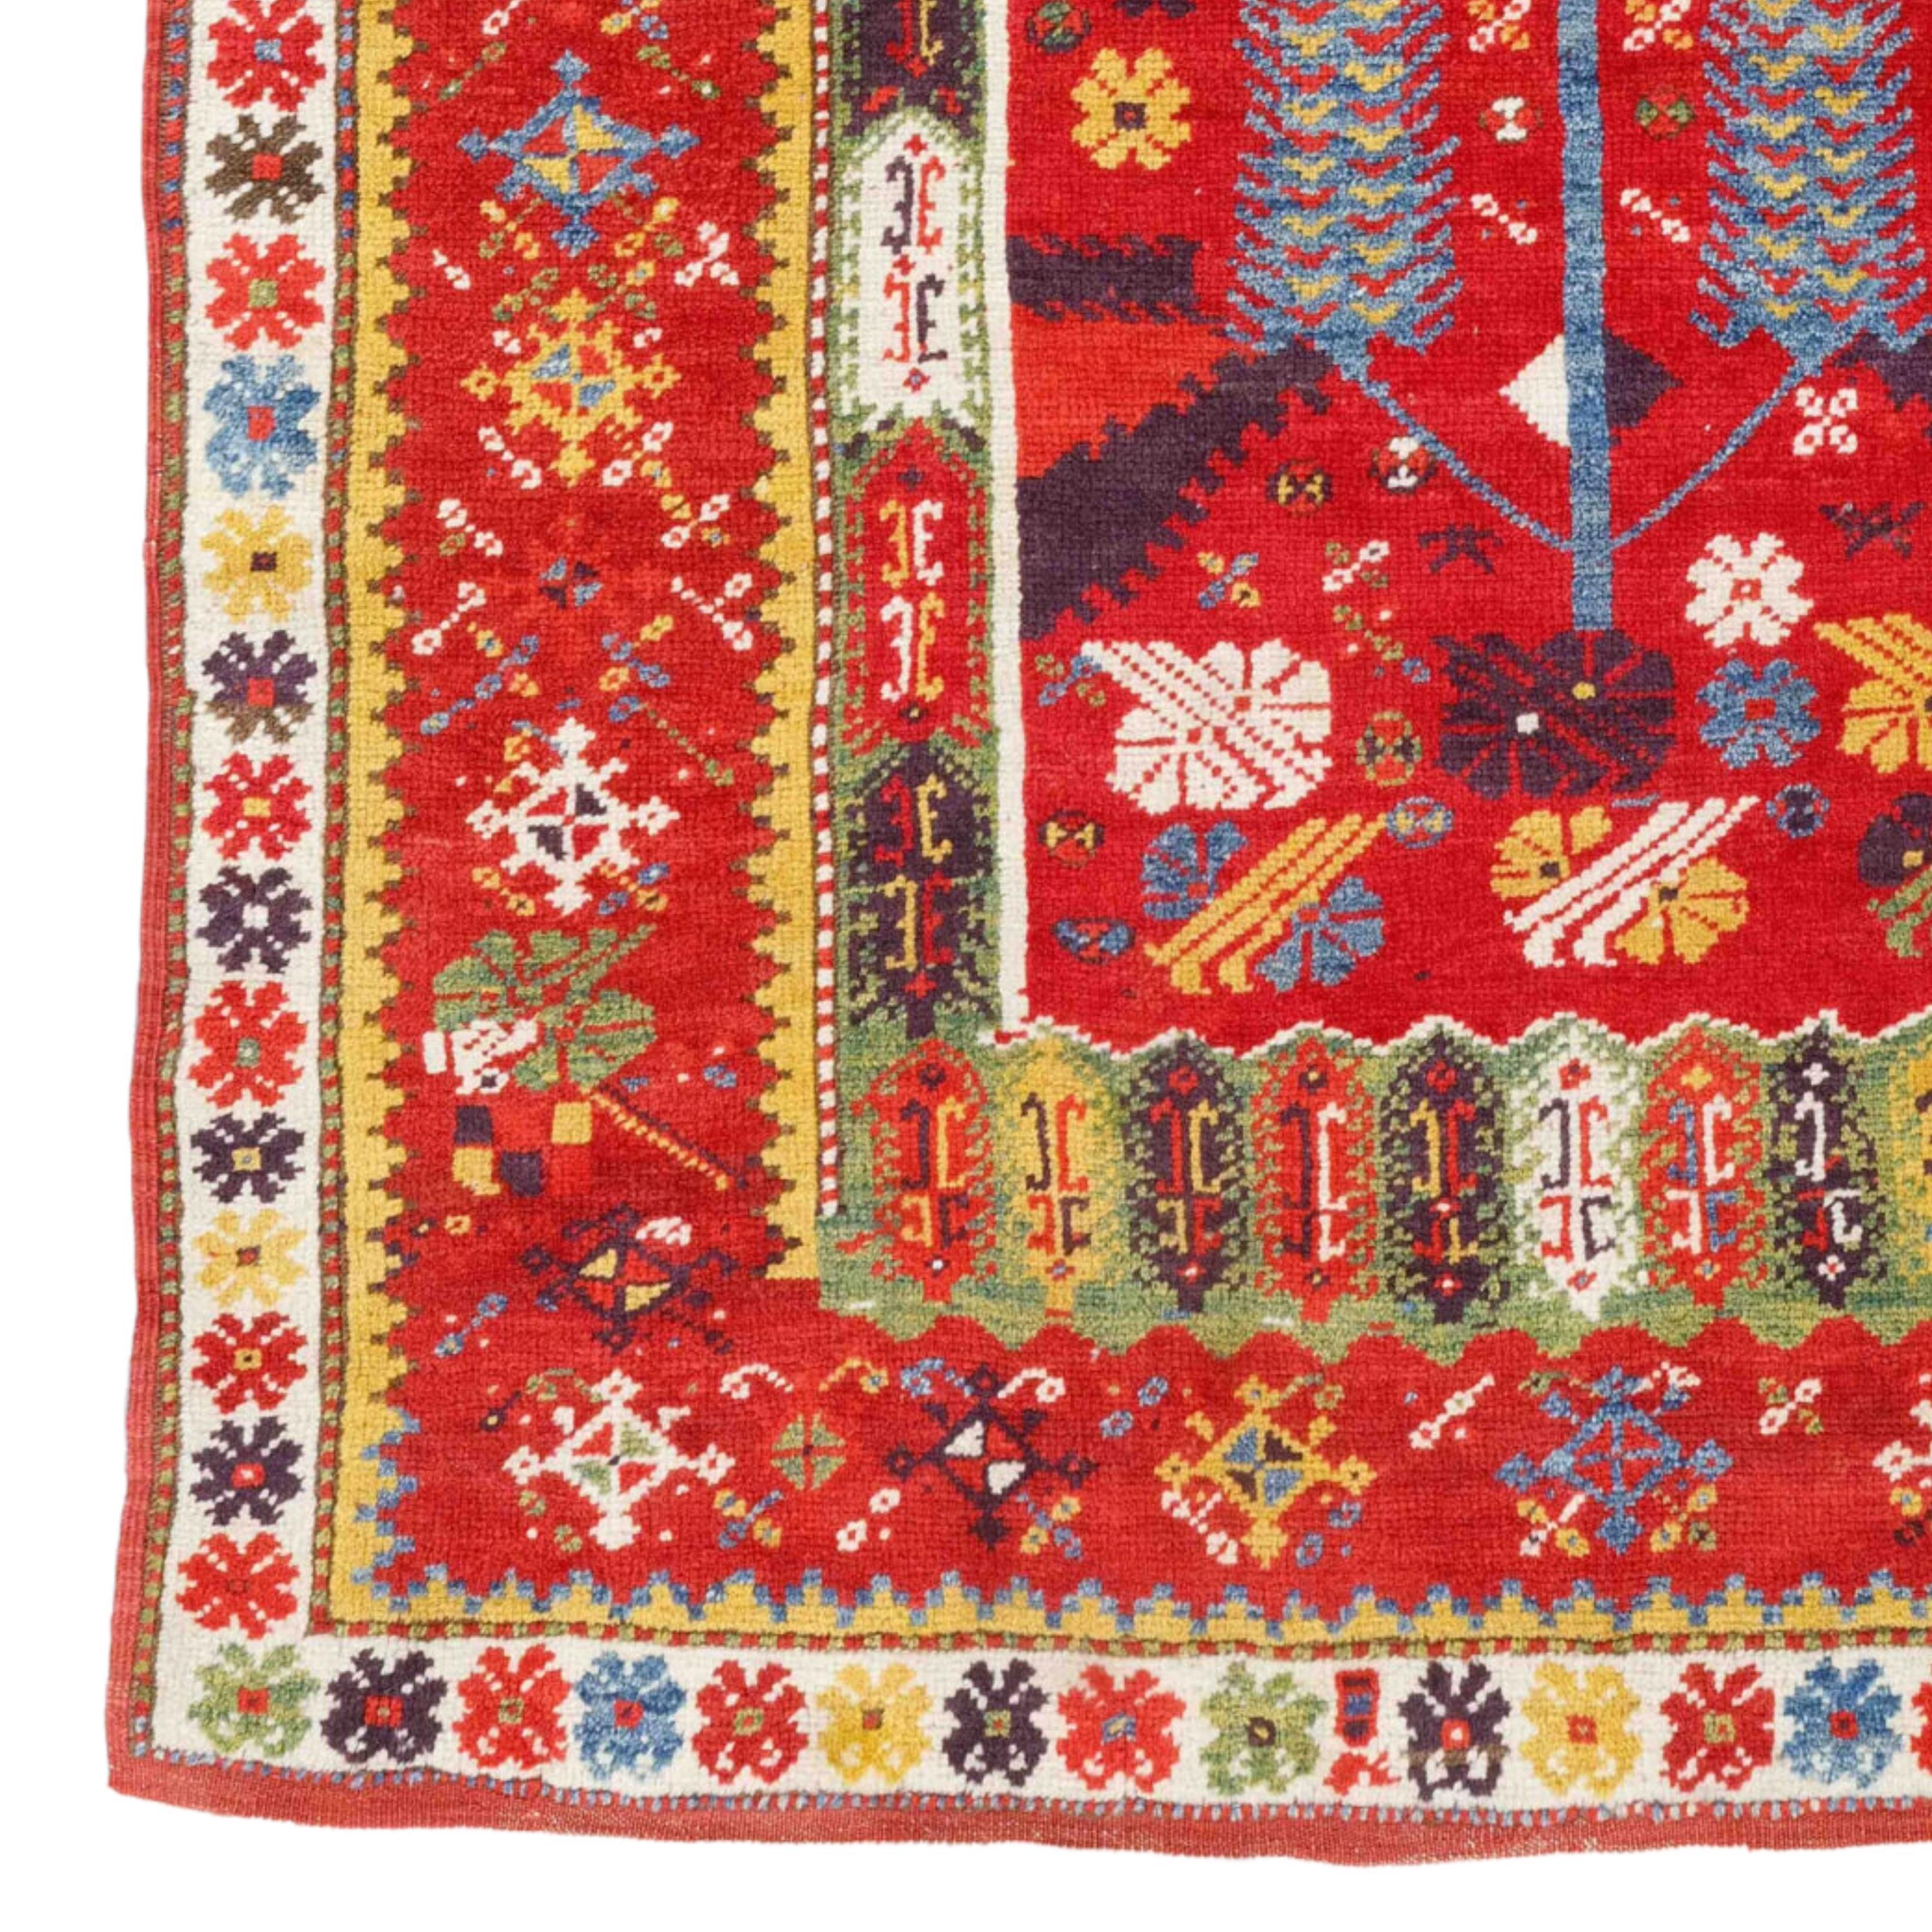 Antique Milas/Melas Prayer Rug - 19th Century Turkish Melas Rug in Perfect Condition
Size 118 x 176 cm (3,87 x 5,77 ft)

Milas Carpets (also written as Melas) - Turkish carpets produced in the Milas district are unique in style and composition. The